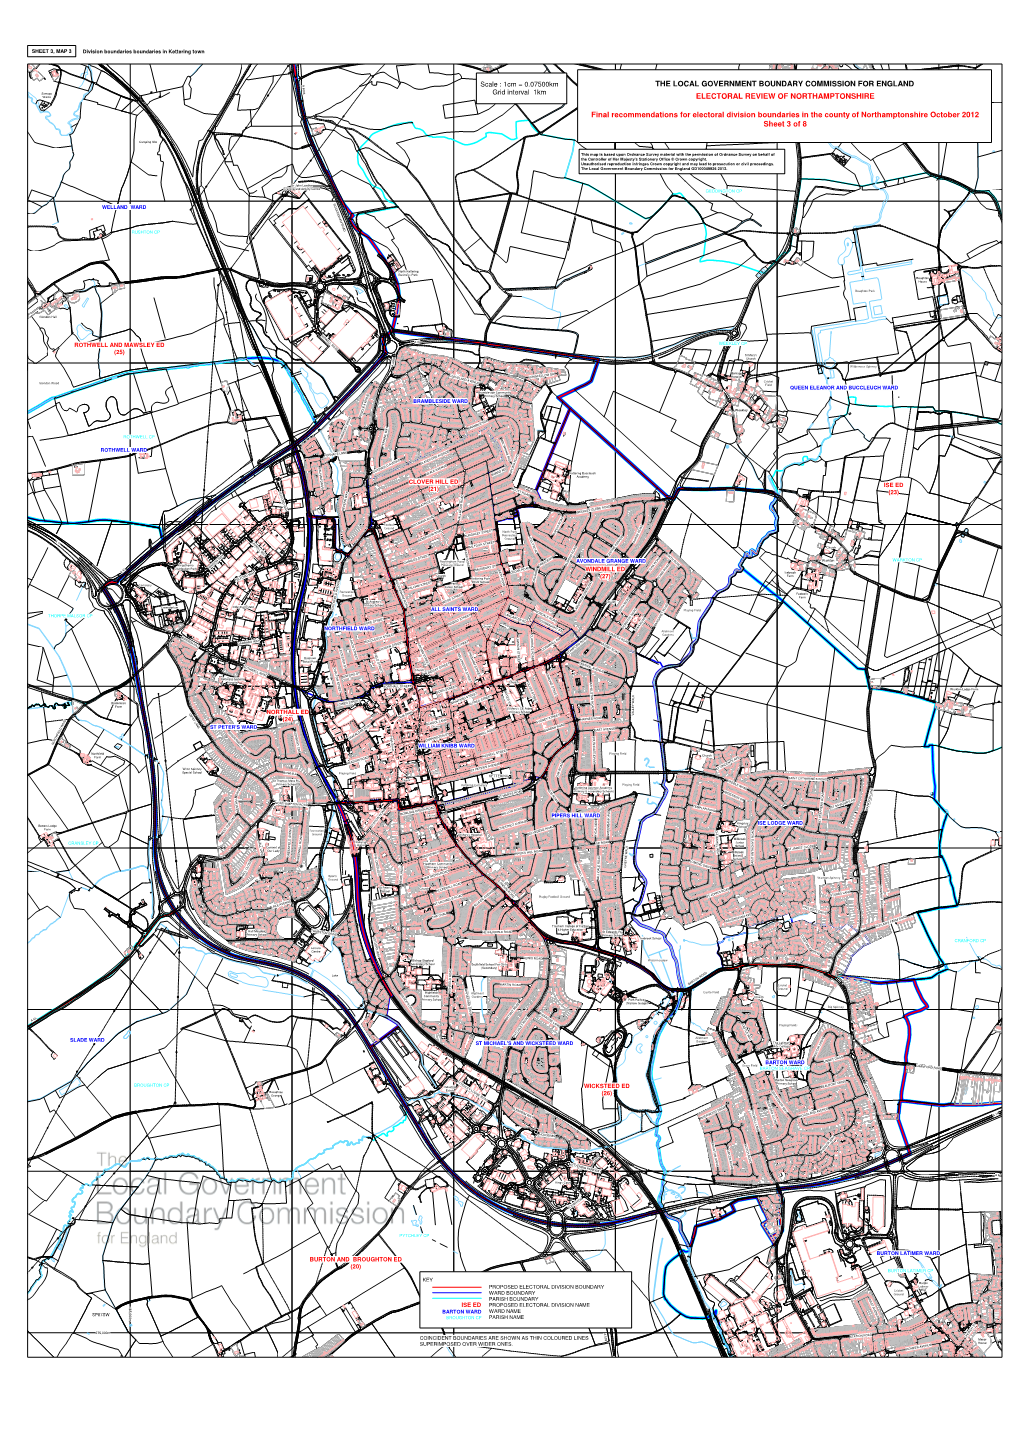 THE LOCAL GOVERNMENT BOUNDARY COMMISSION for ENGLAND Q 0 Recreation Ground 0 Sewage 3 Grid Interval 1Km Works ELECTORAL REVIEW of NORTHAMPTONSHIRE